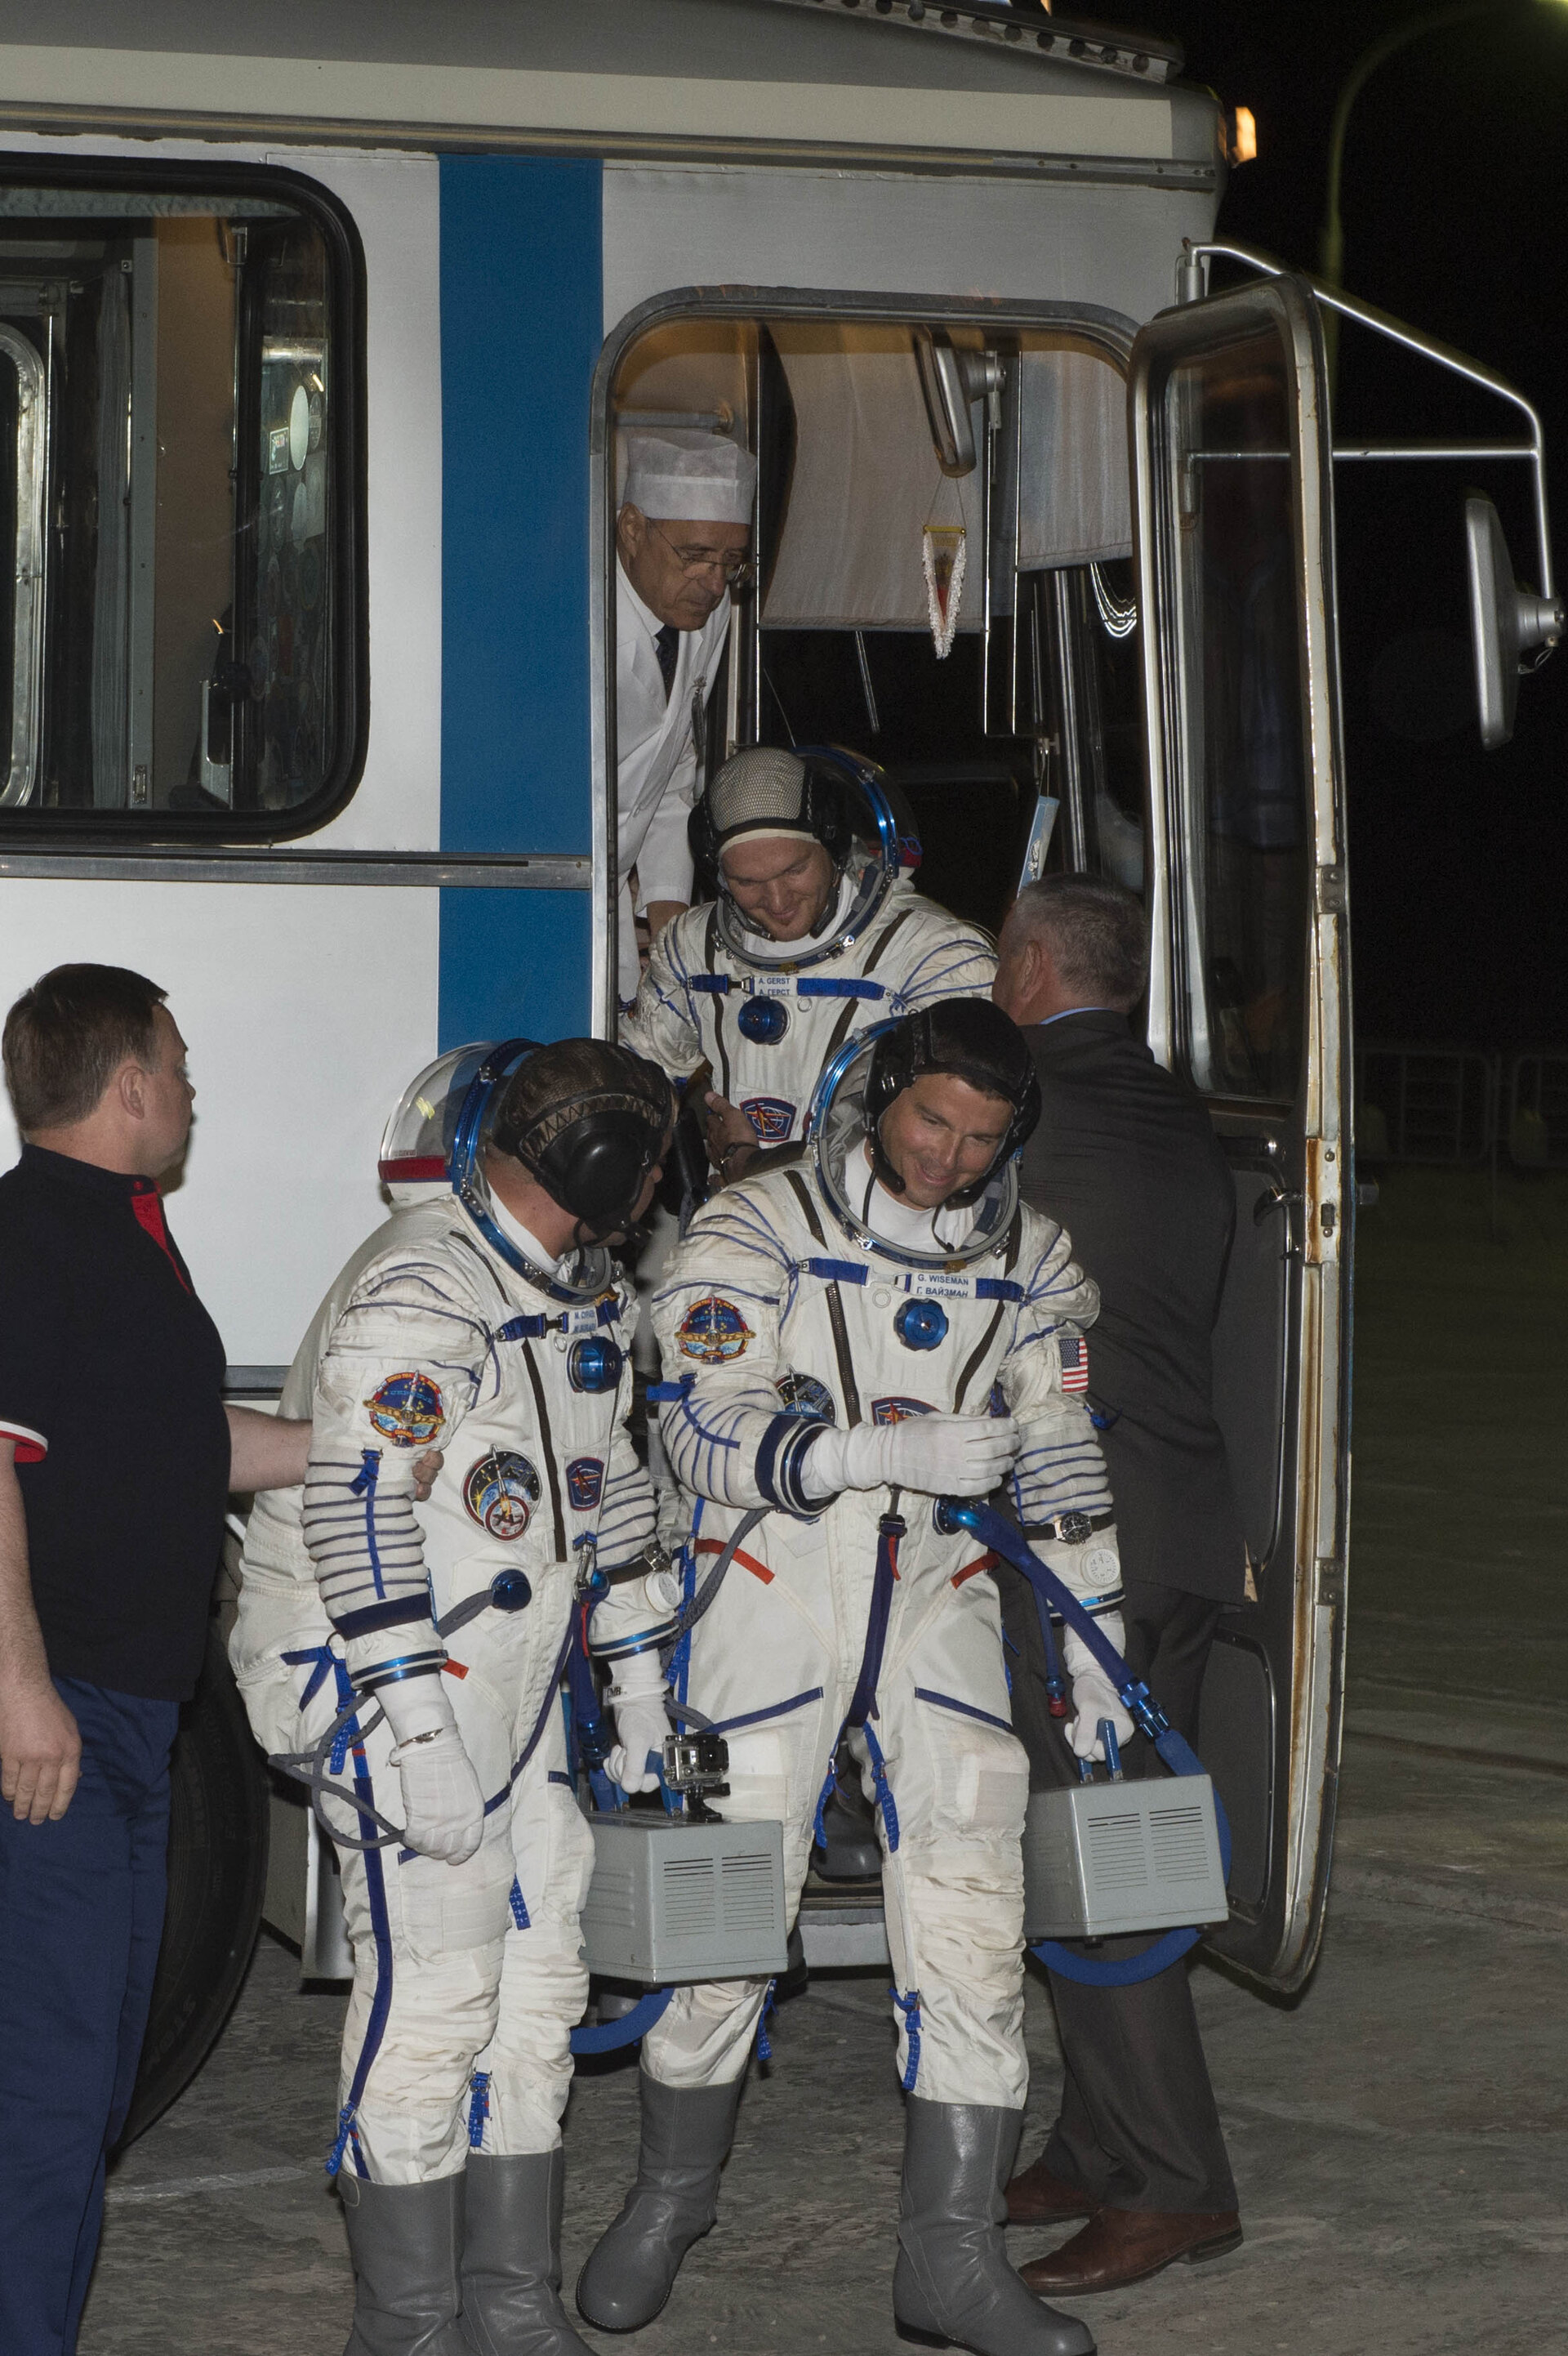 Arrival at the launch pad of Expedition 40/41 crew members